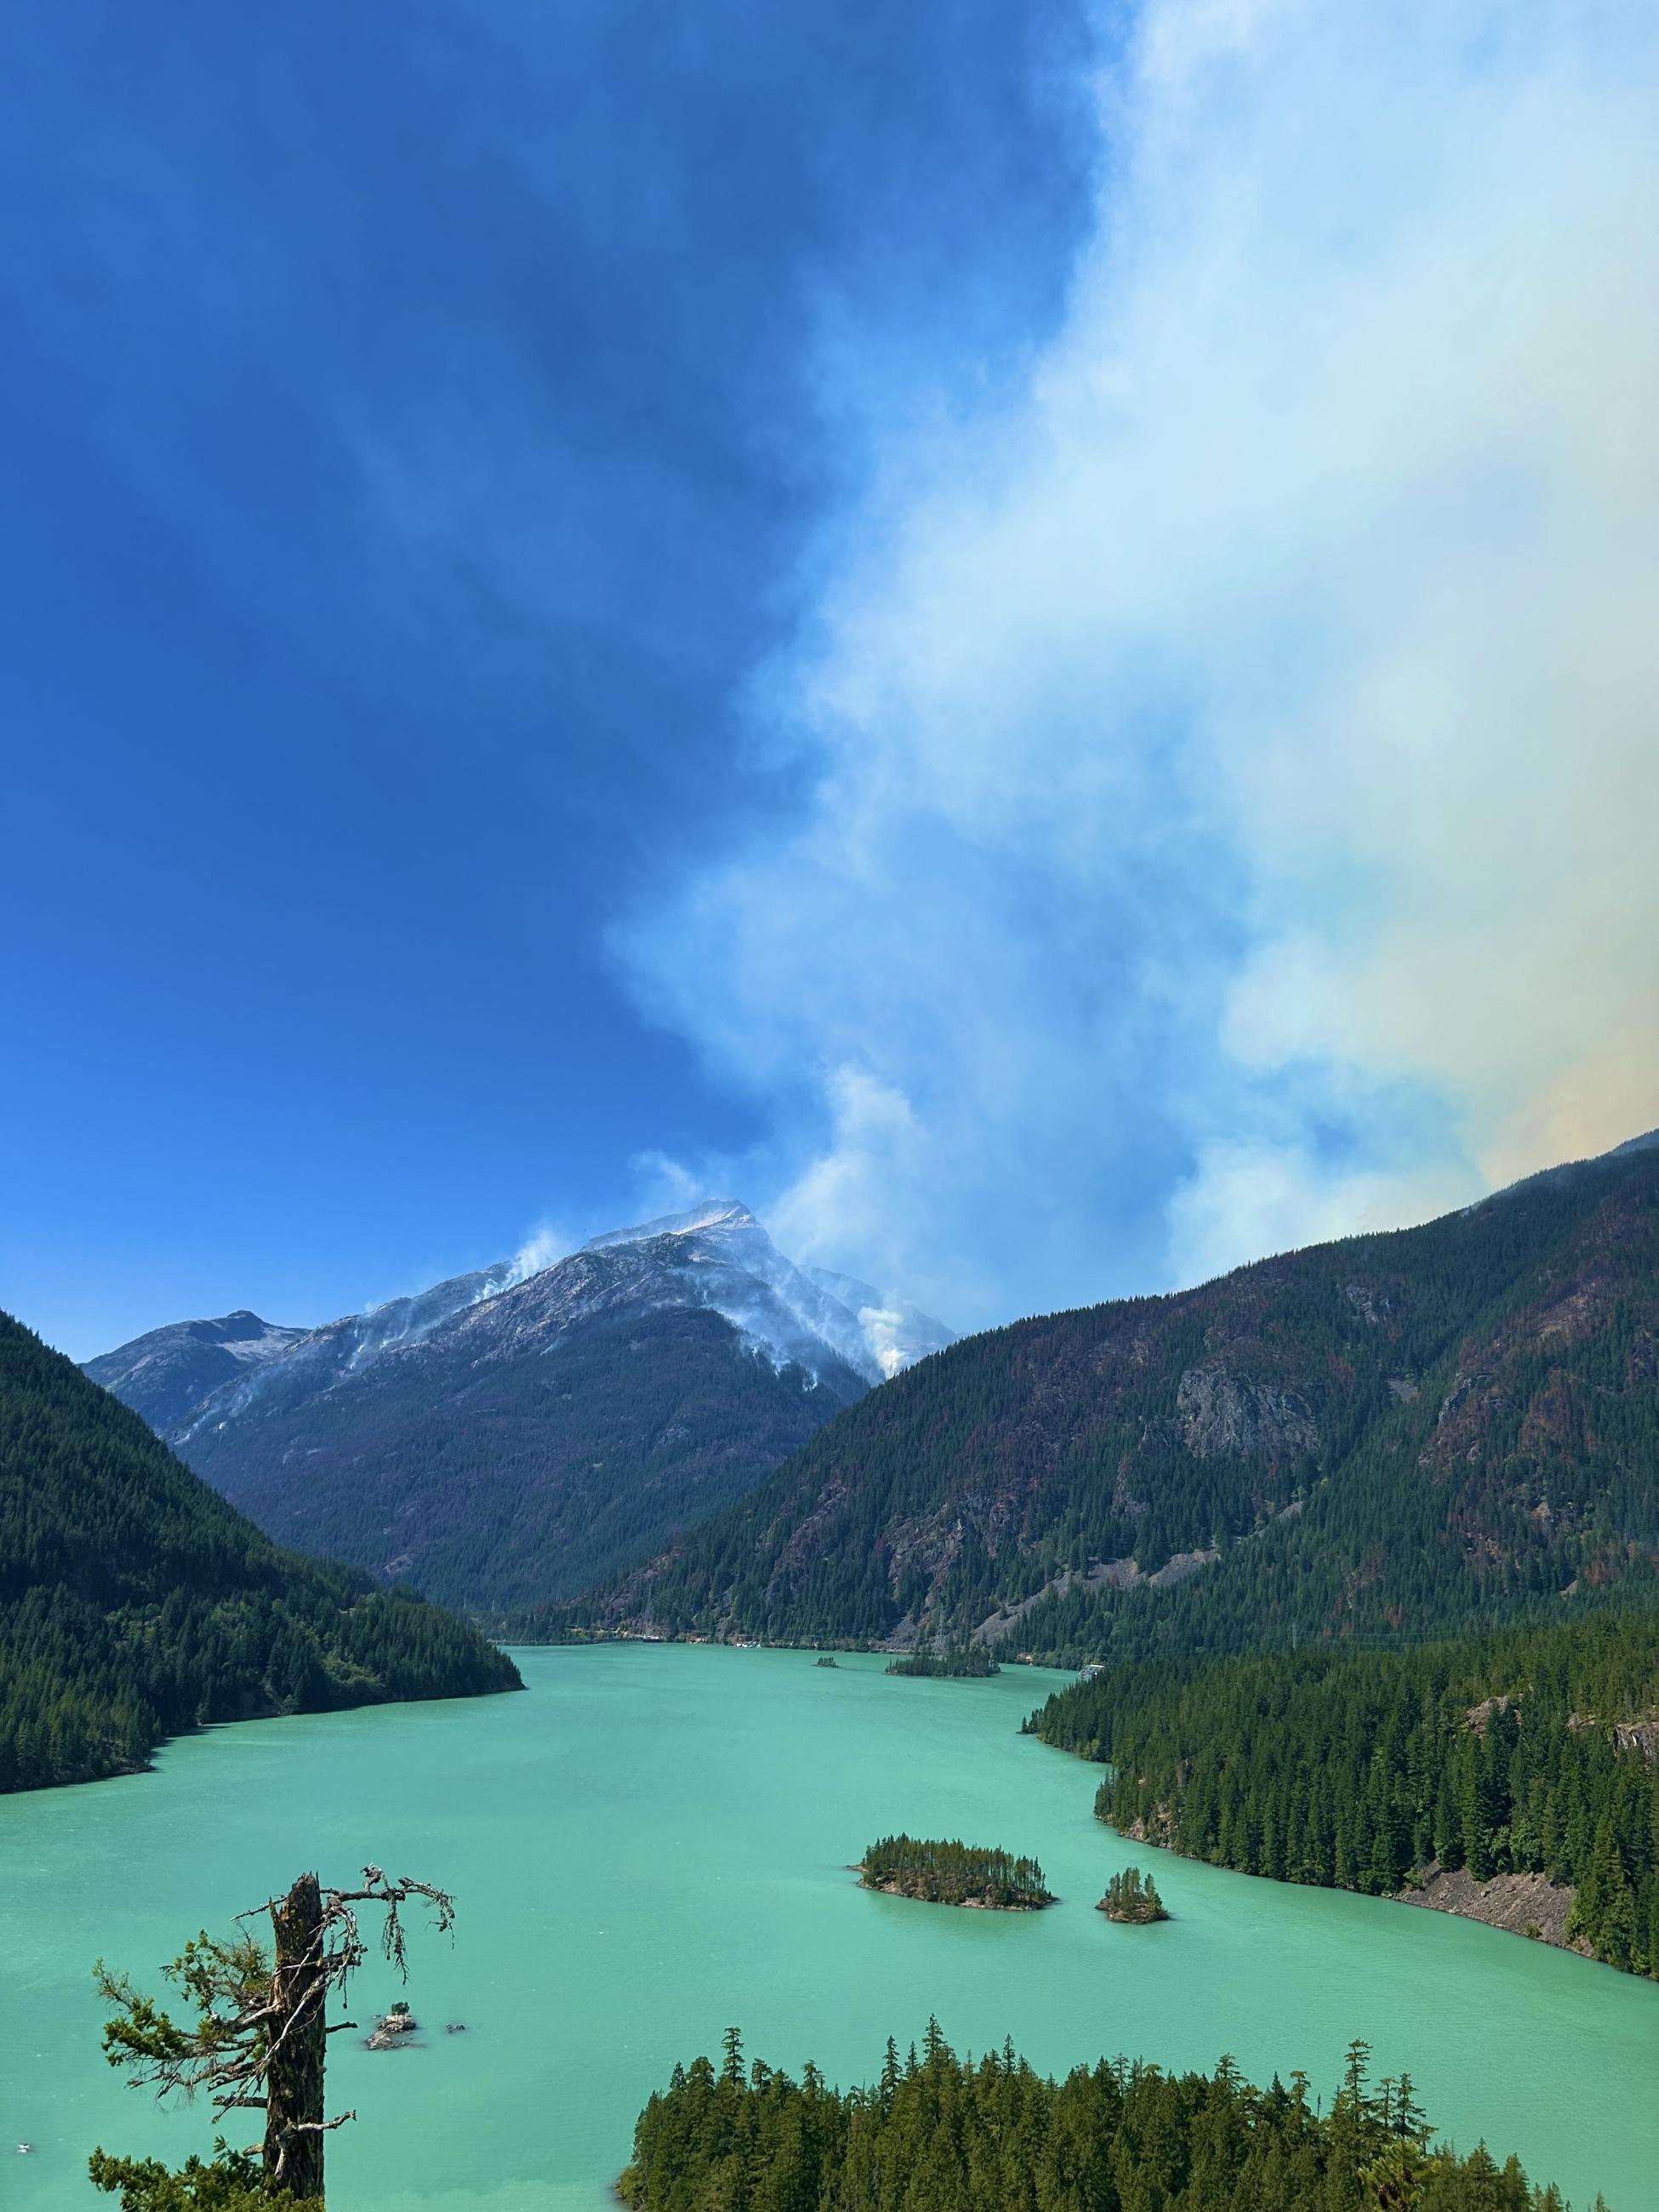 A photo of a lake in the foreground, with smoke rising from the hillside across the water.